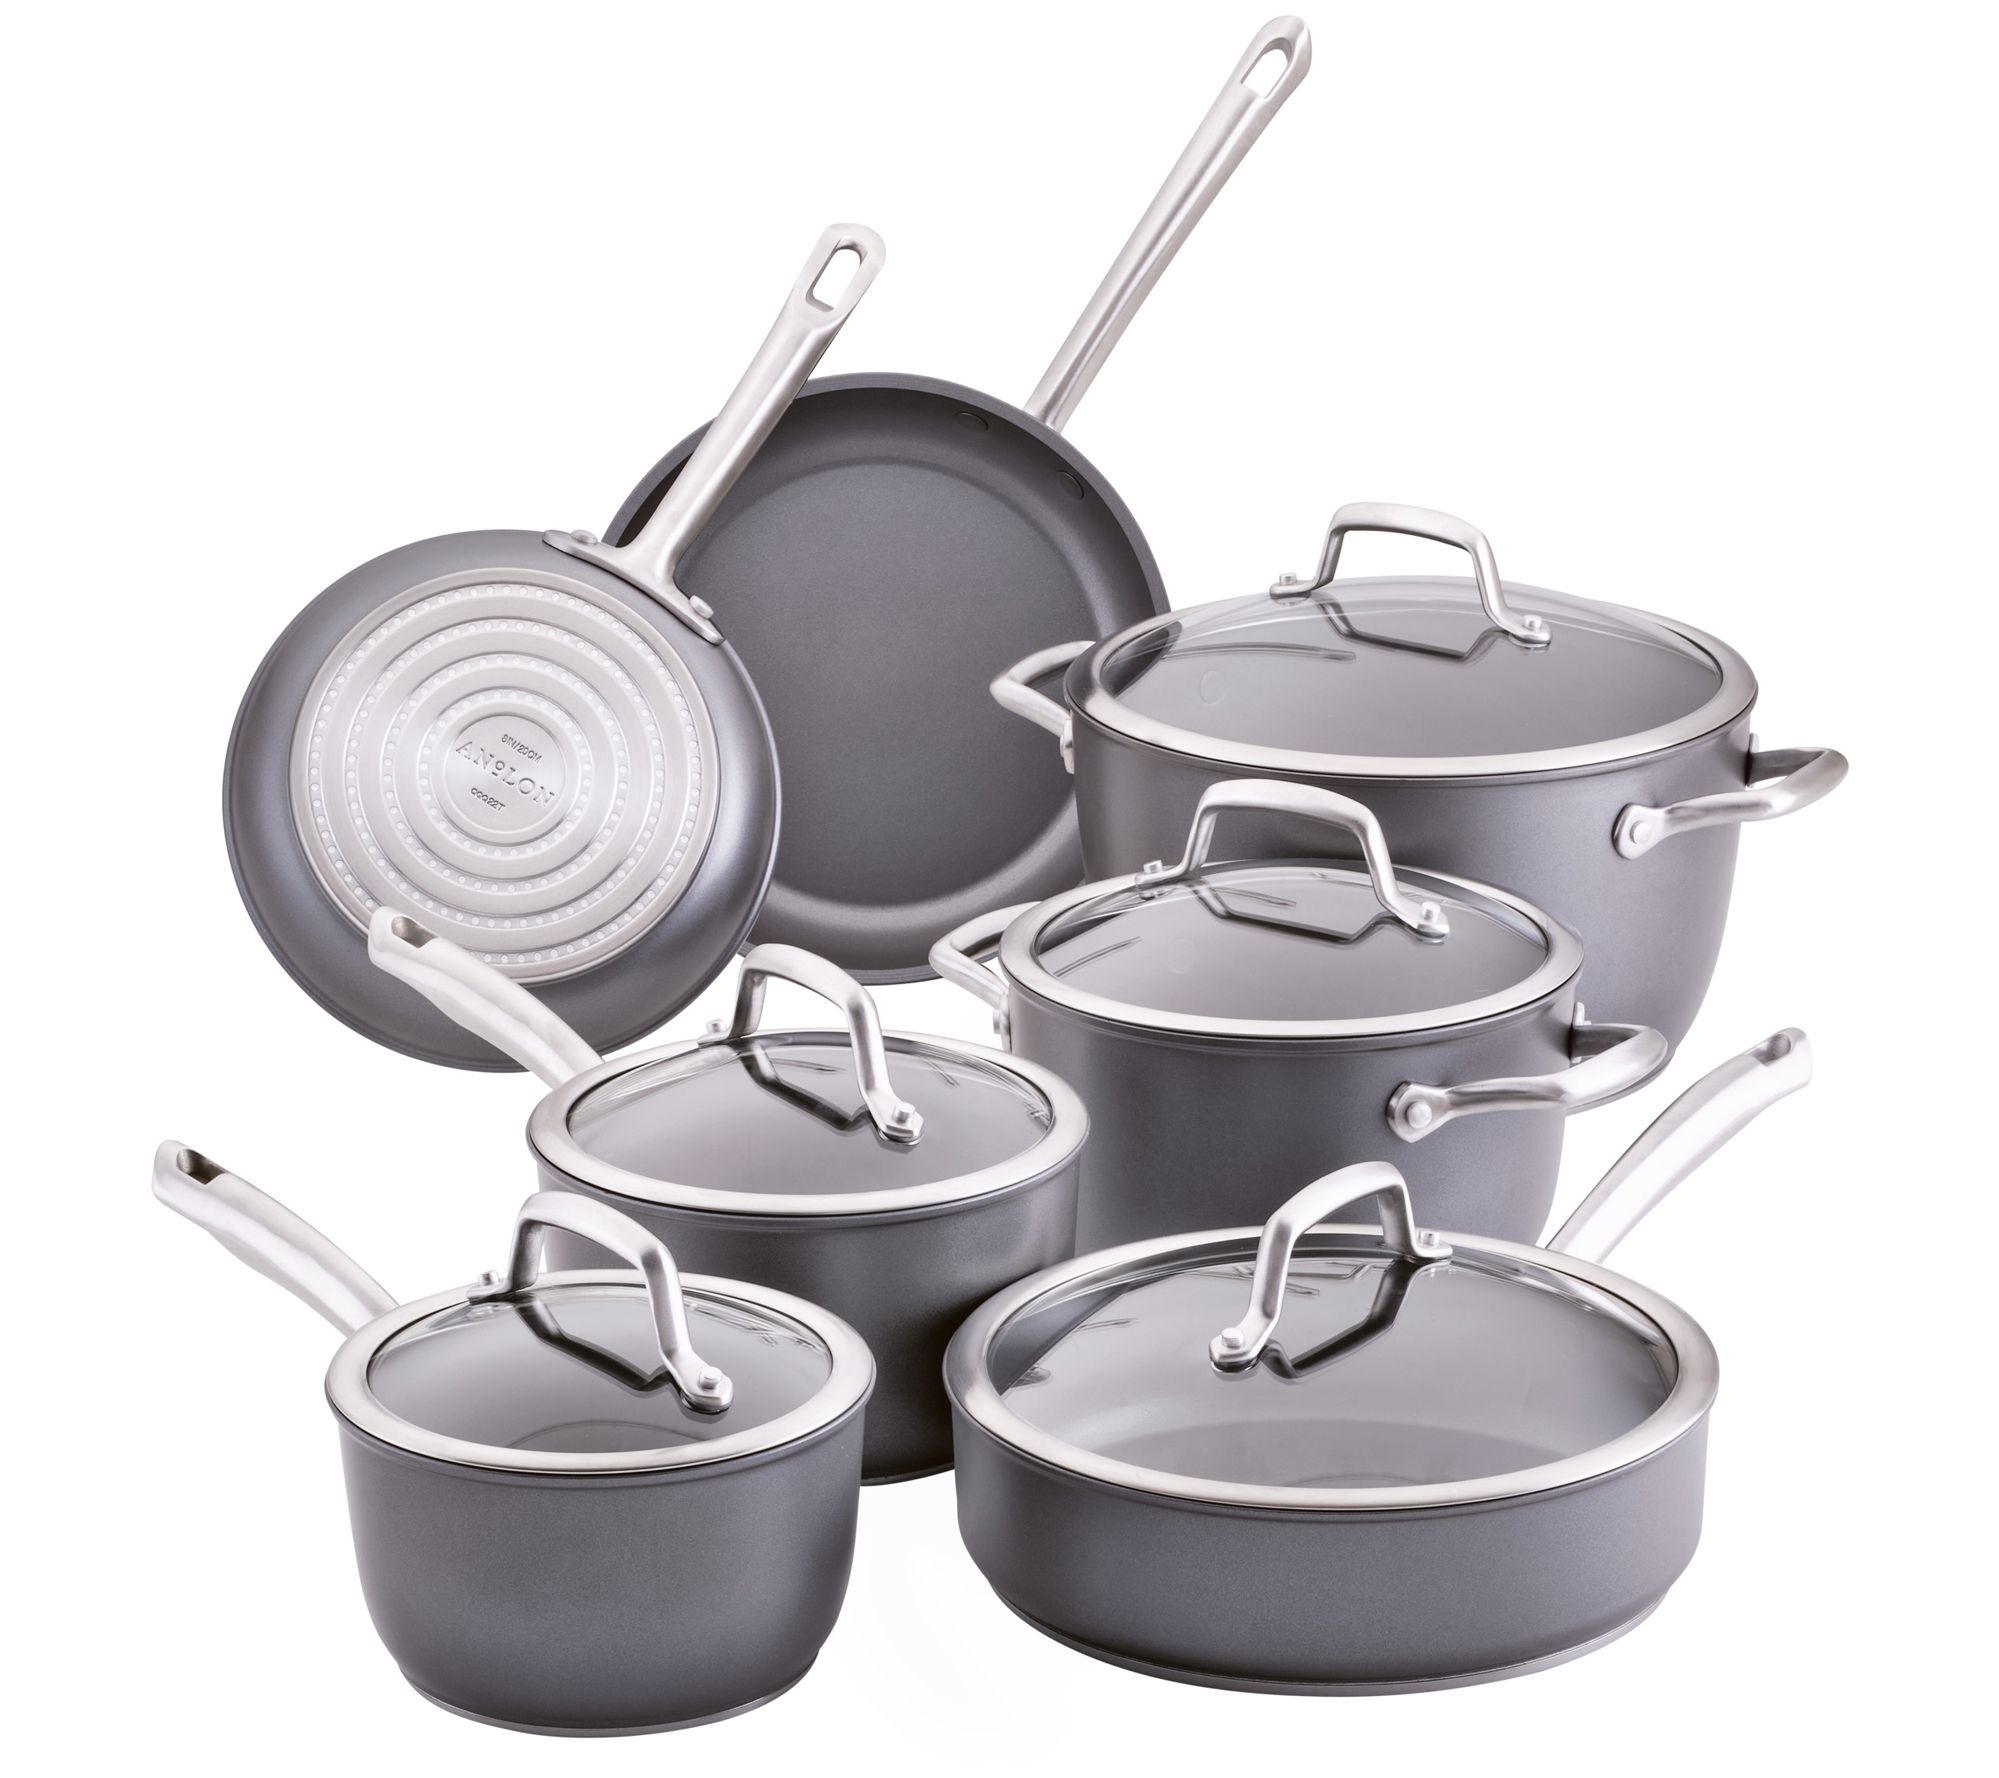 Anolon Accolade Hard-Anodized 12pc Nonstick Induction Set 